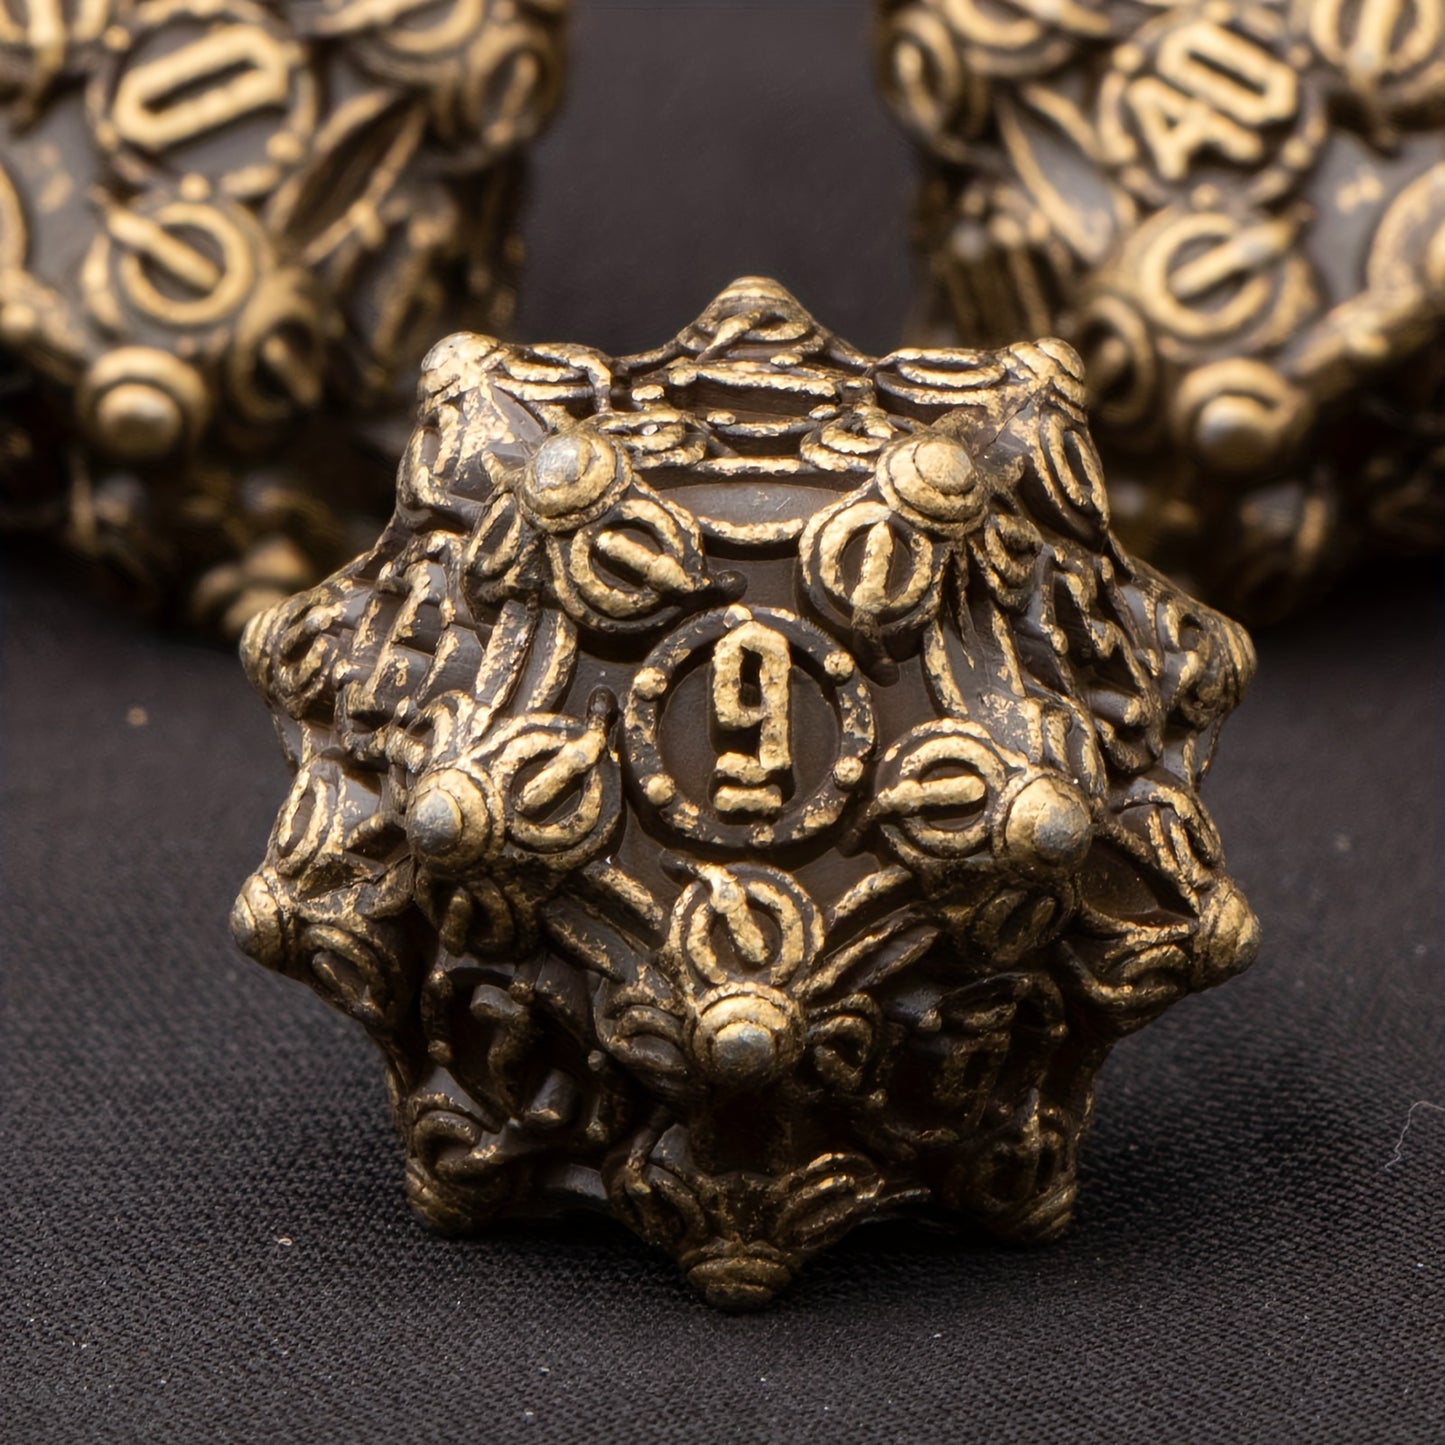 FREE Today: Metal Brown Dice For D&D